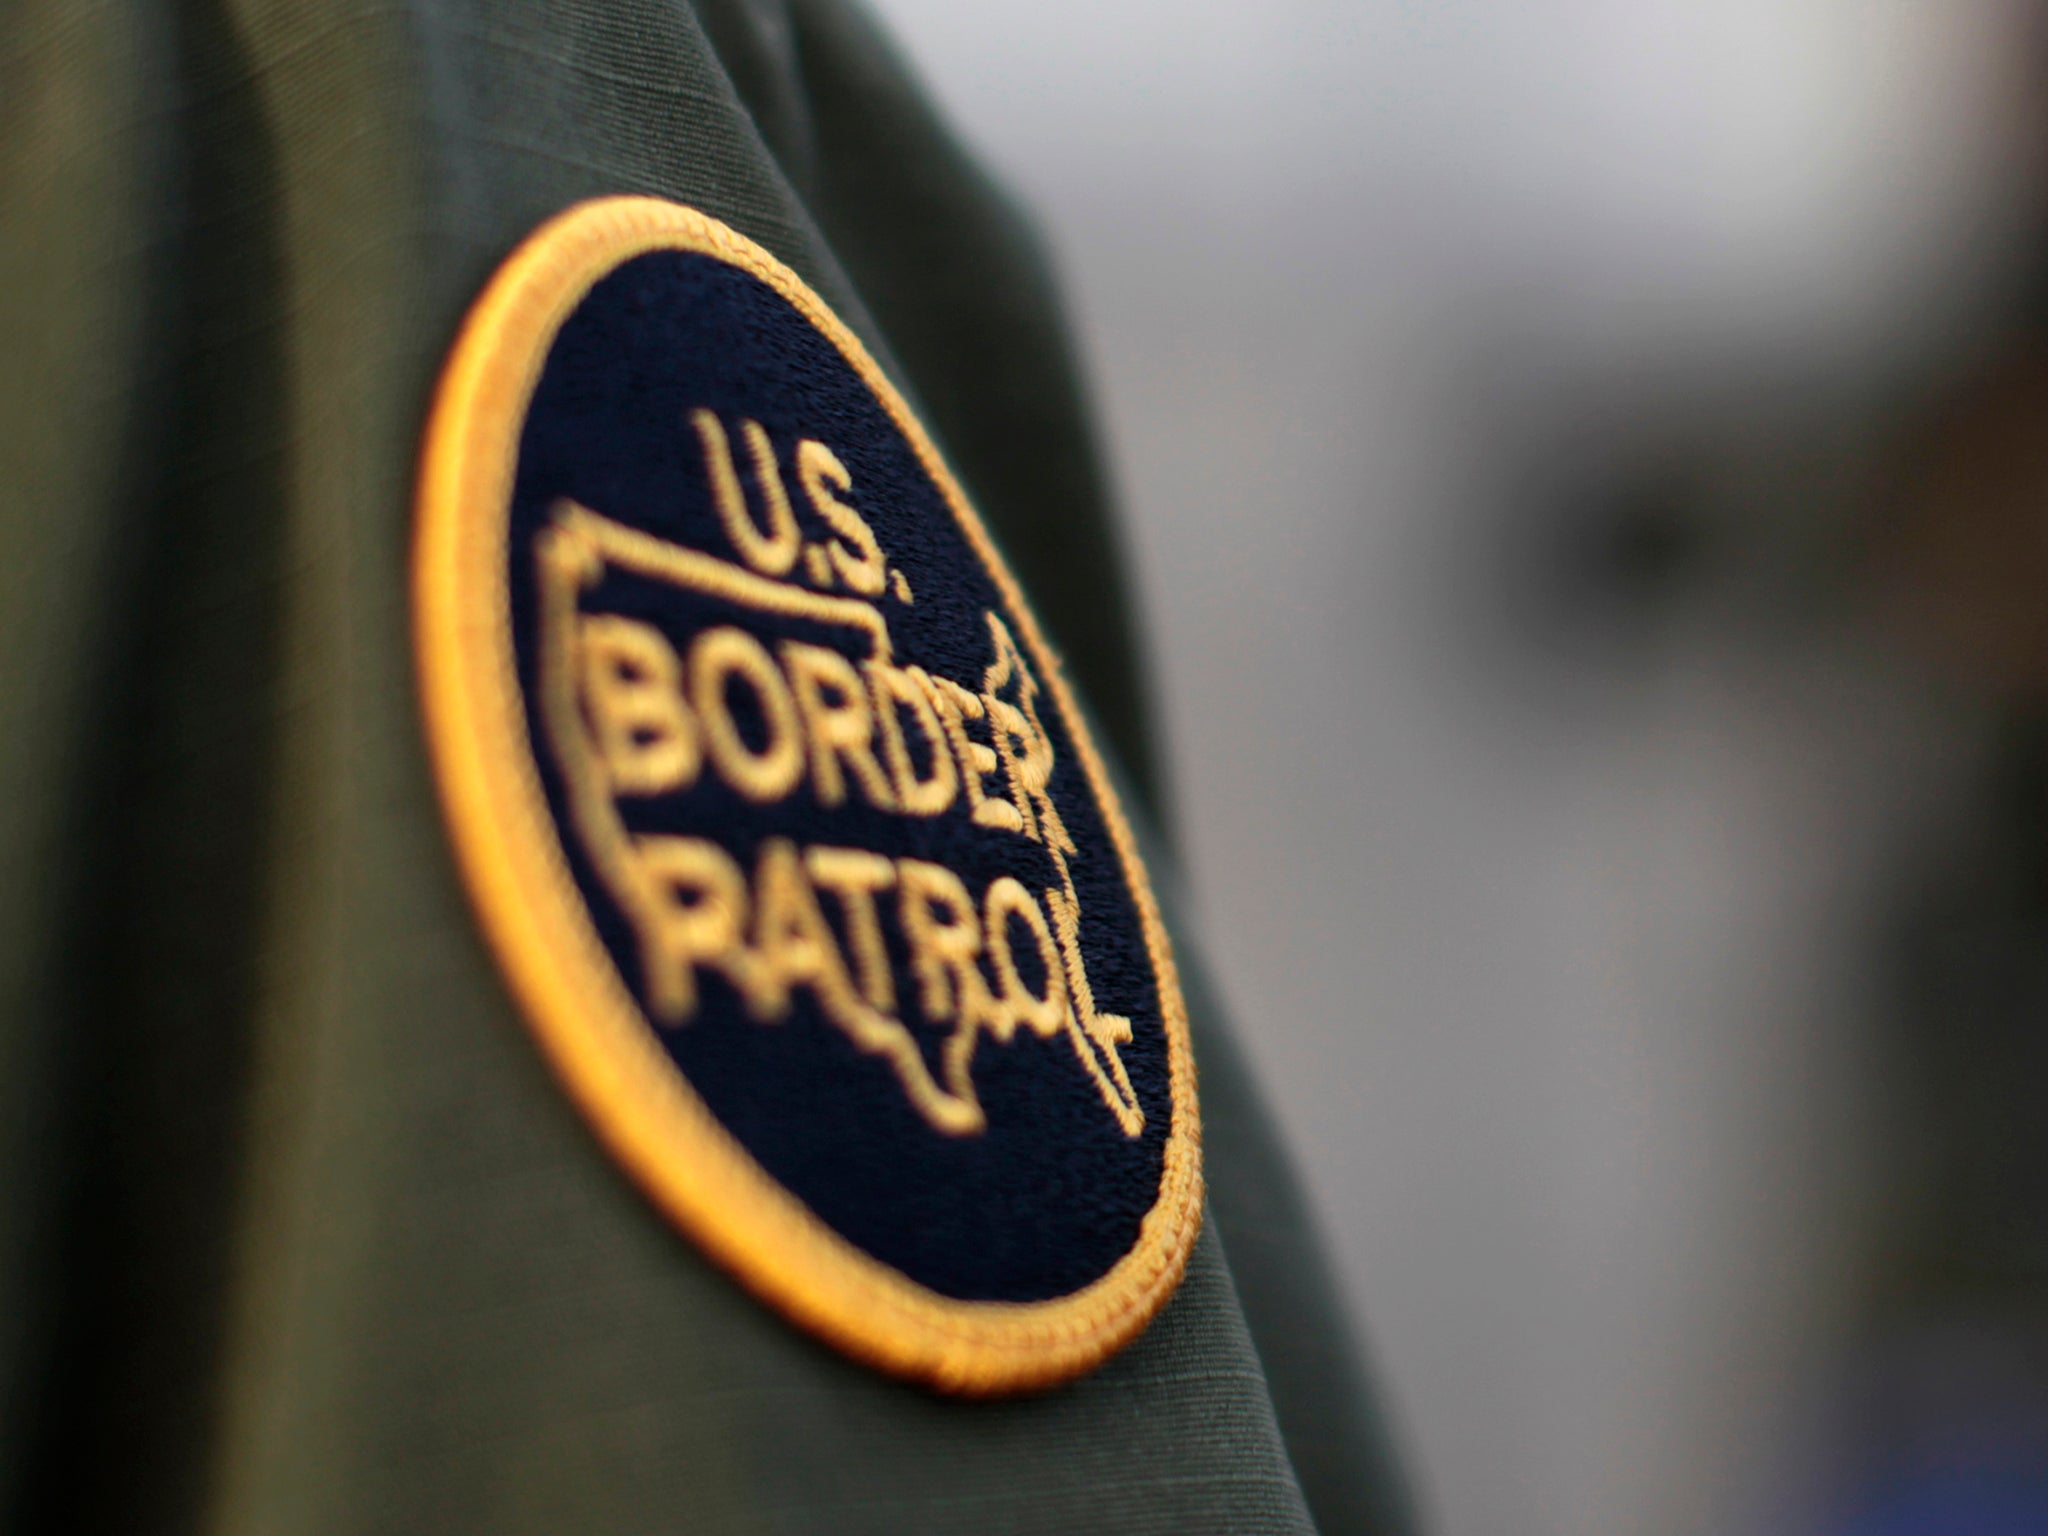 A US Customs and Border Protection agent